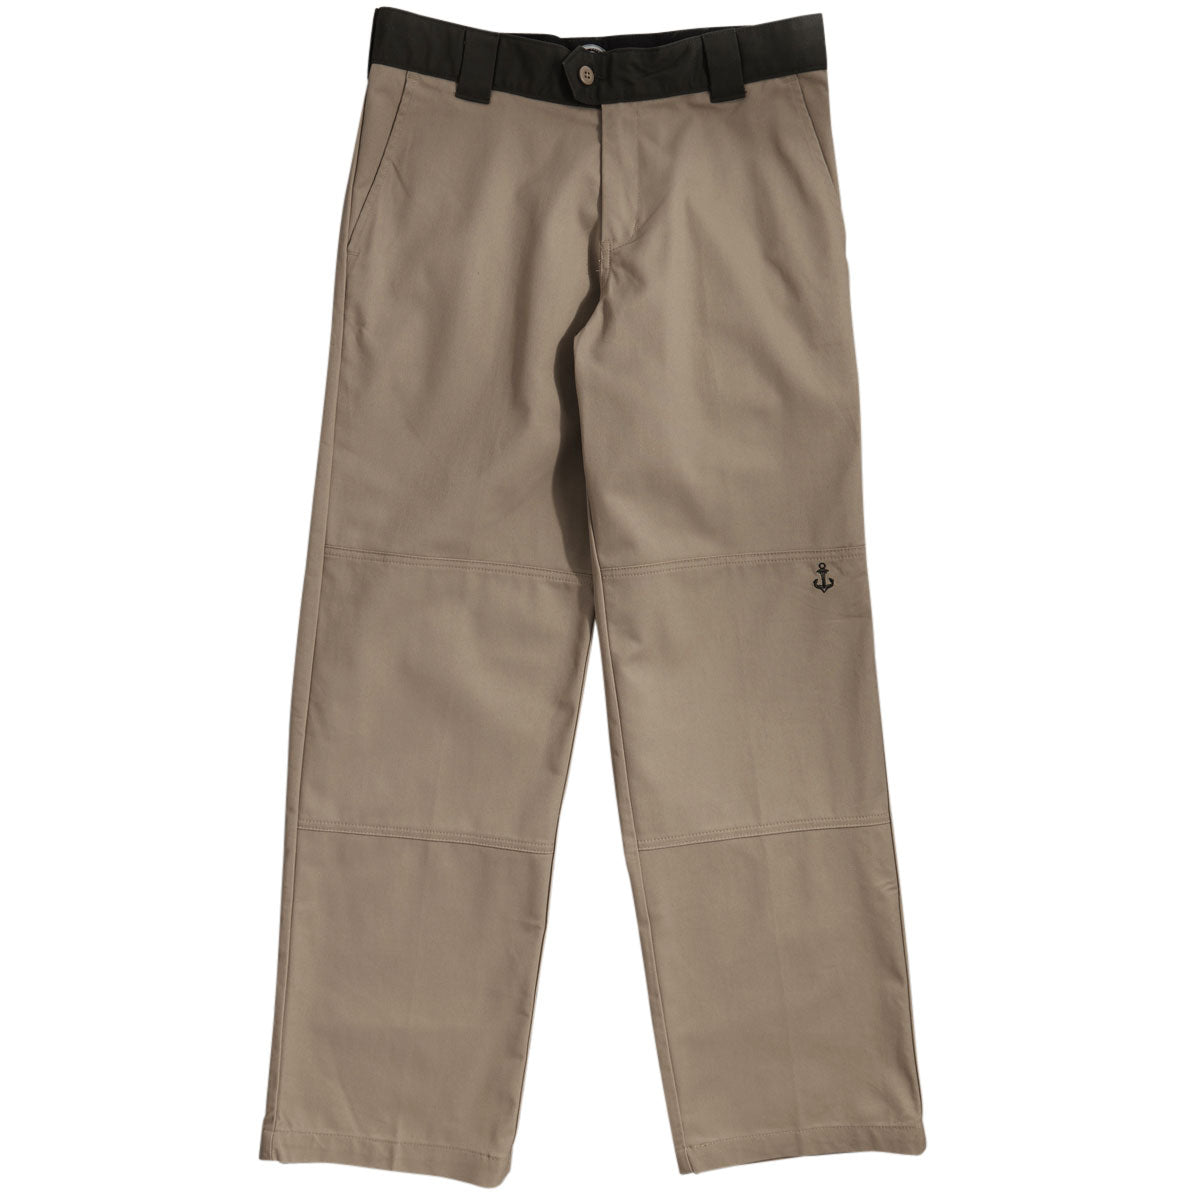 Dickies Ronnie Sandoval Loose Fit Double Knee Pants - Desert Sand/Olive Green image 1